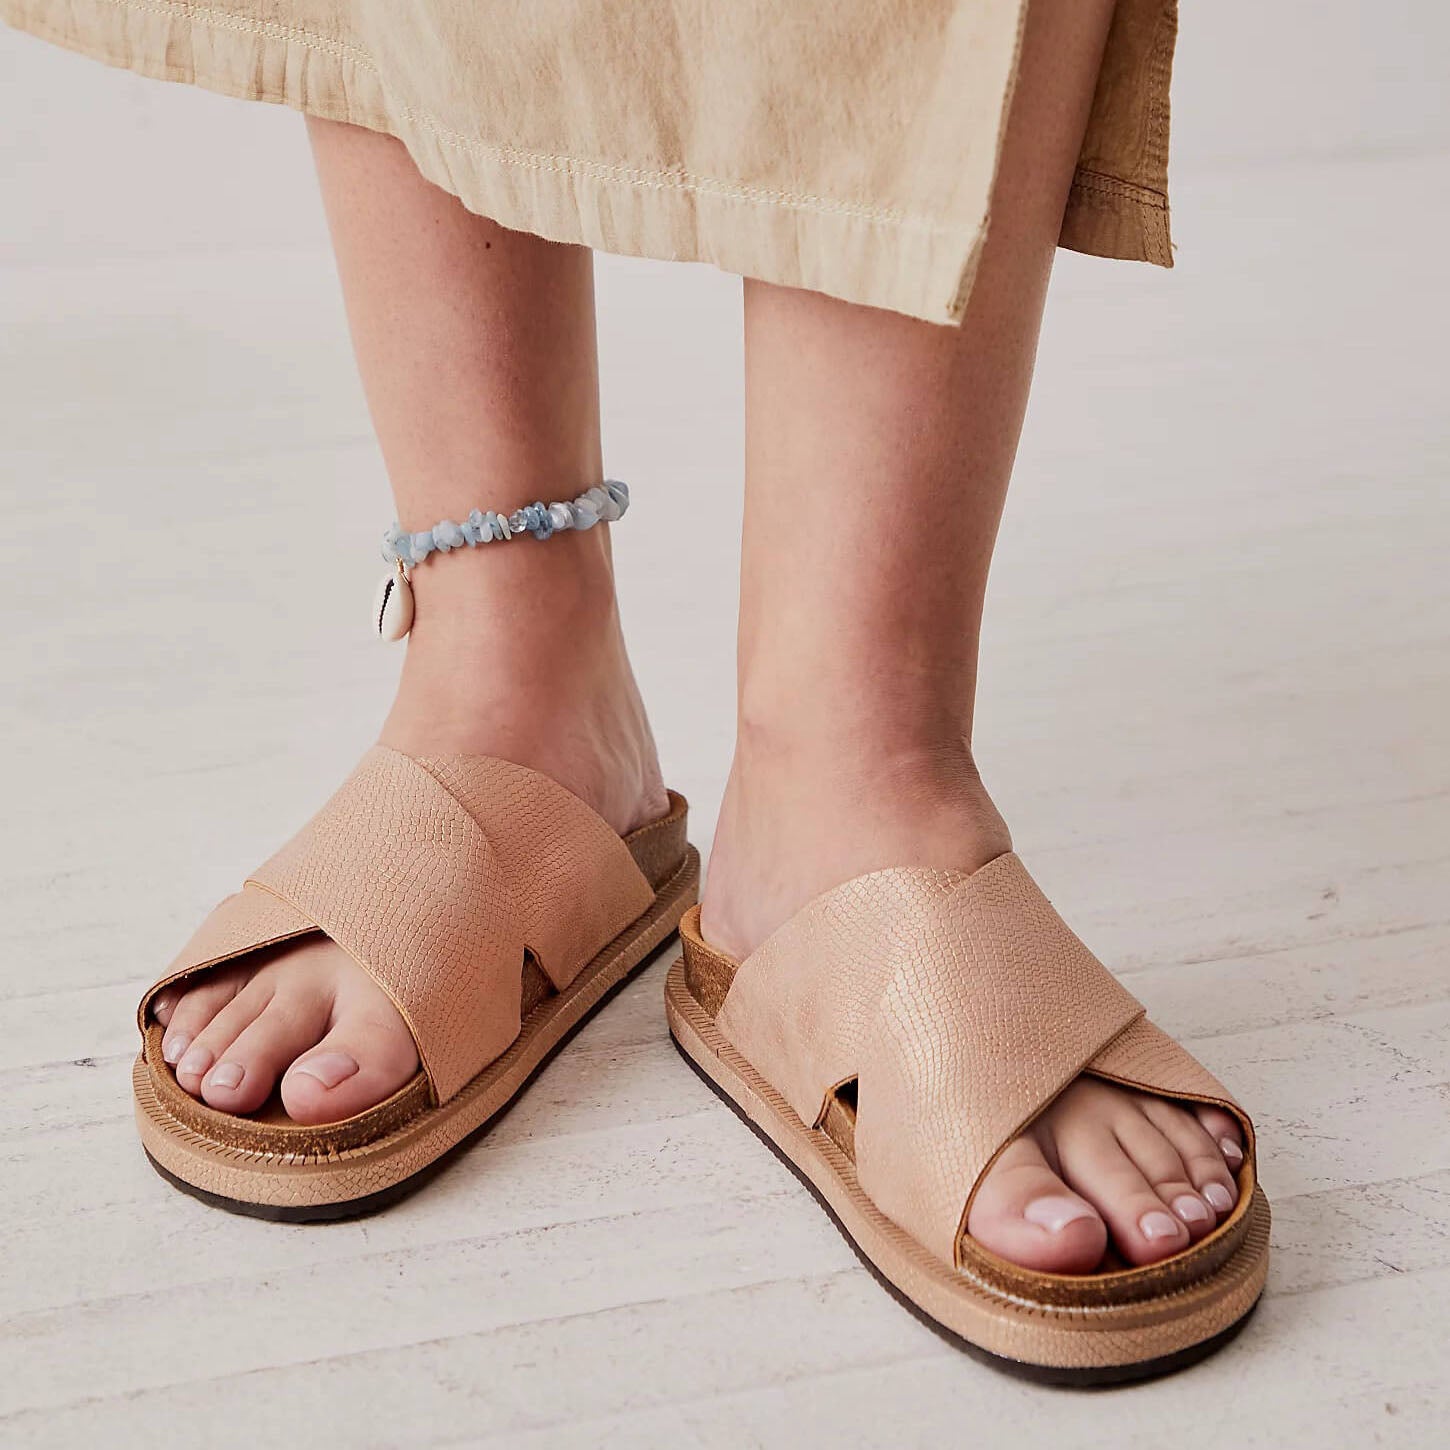 Free People sandals for summer.